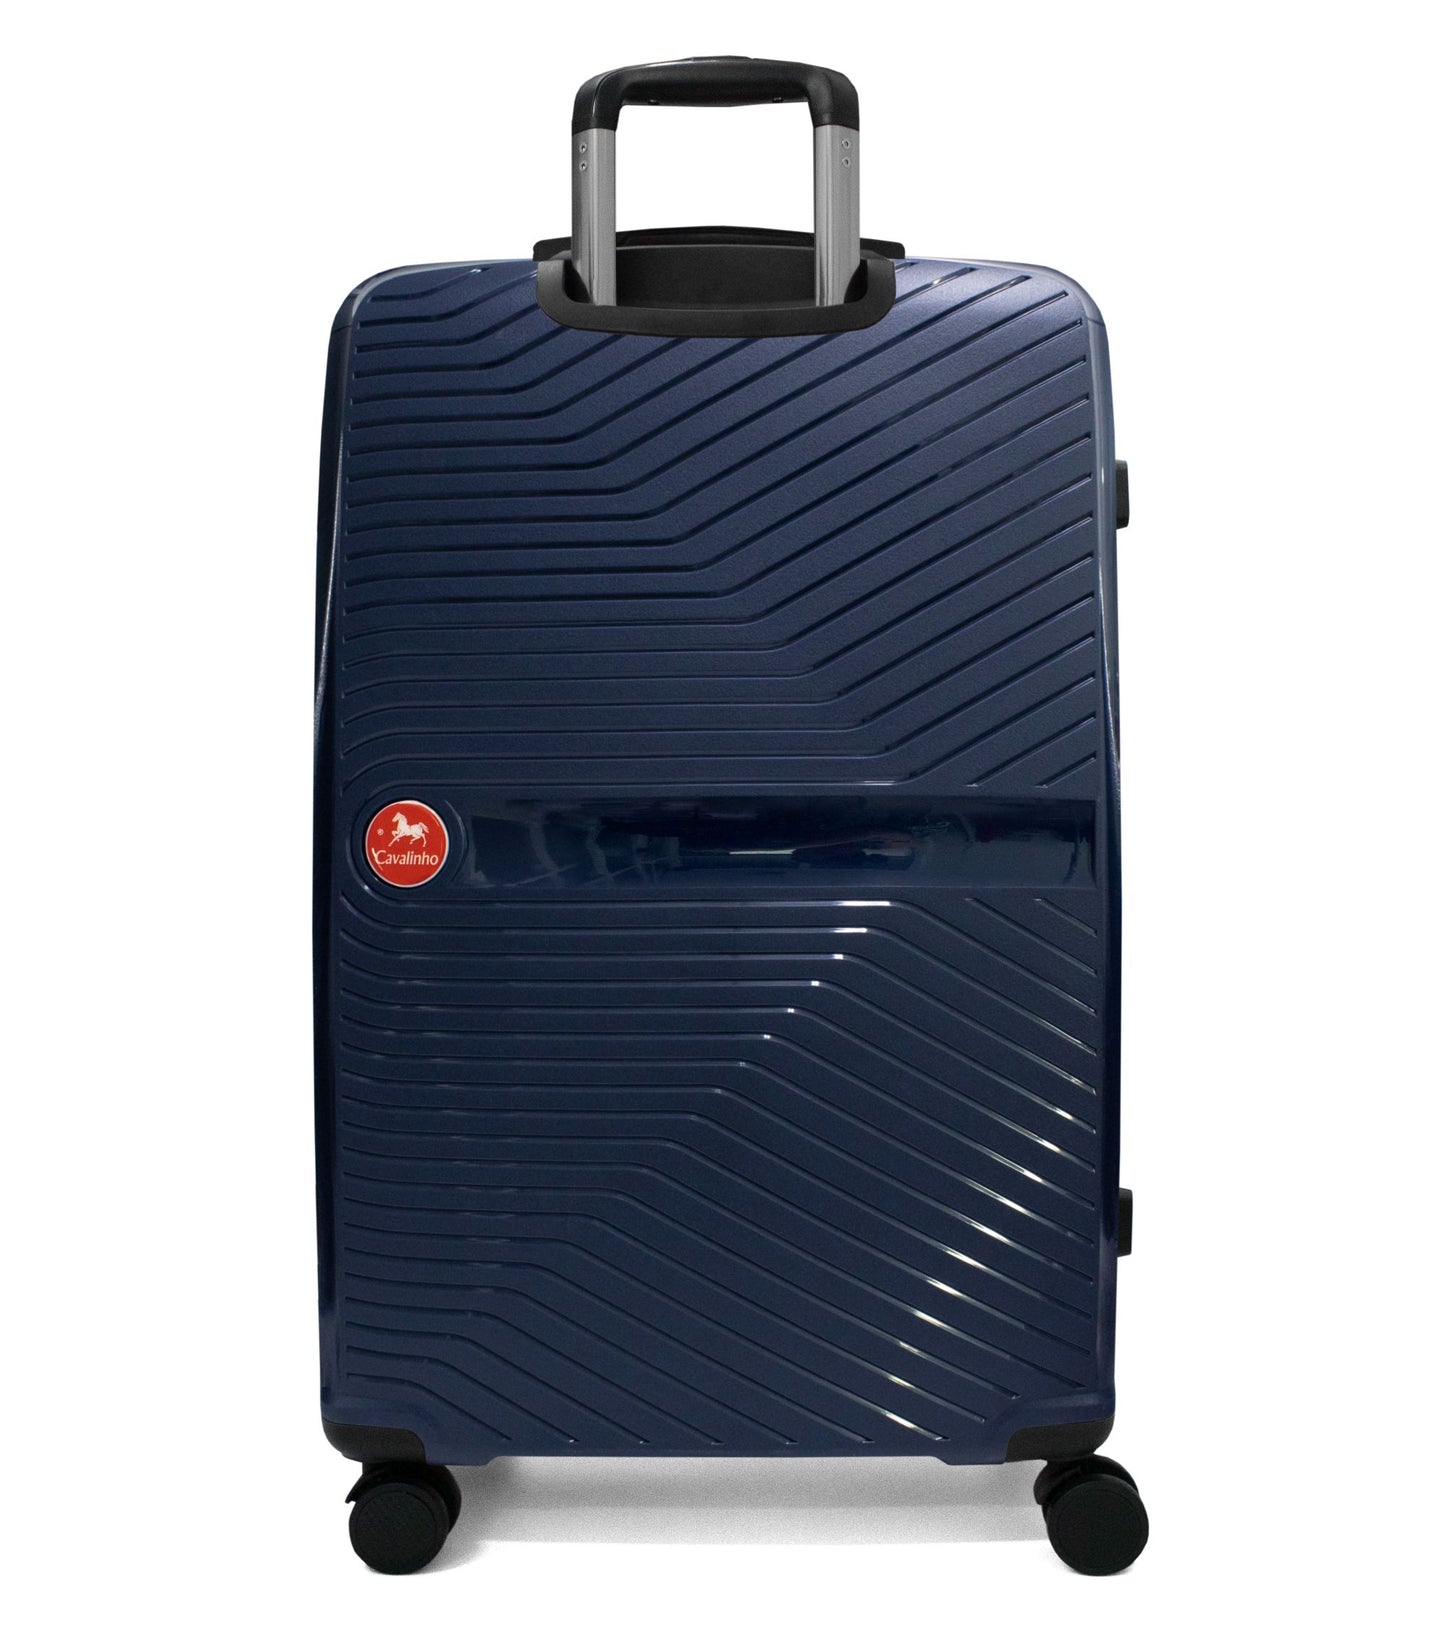 Cavalinho Colorful Check-in Hardside Luggage (28") - 28 inch Navy - 68020004.03.28_3